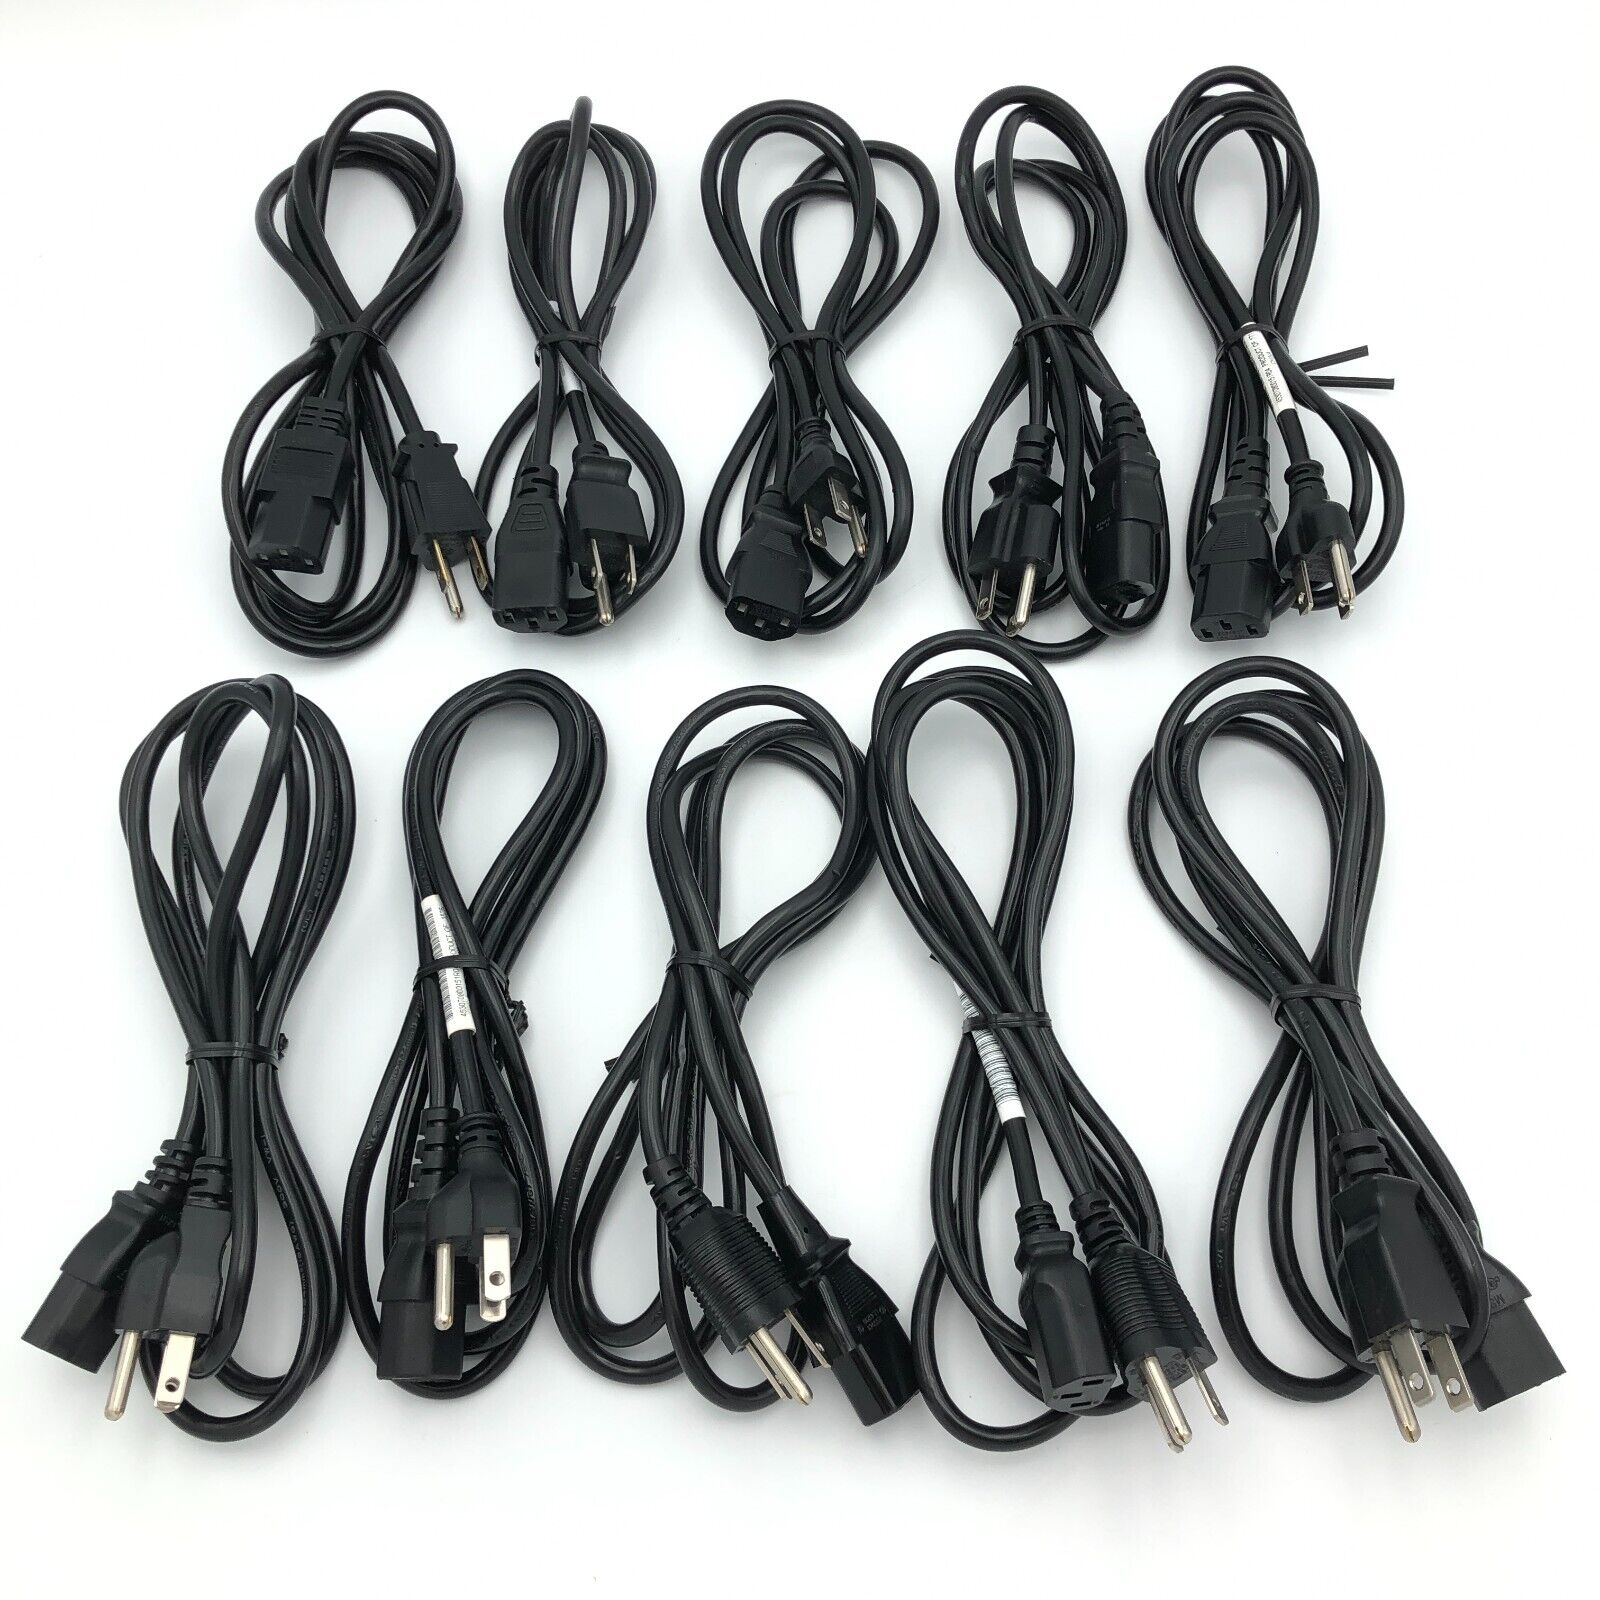 Lot of 25 HIGH QUALITY 3 Prong Power Cord NEMA 5-15 to IEC C13 for HP DELL, etc